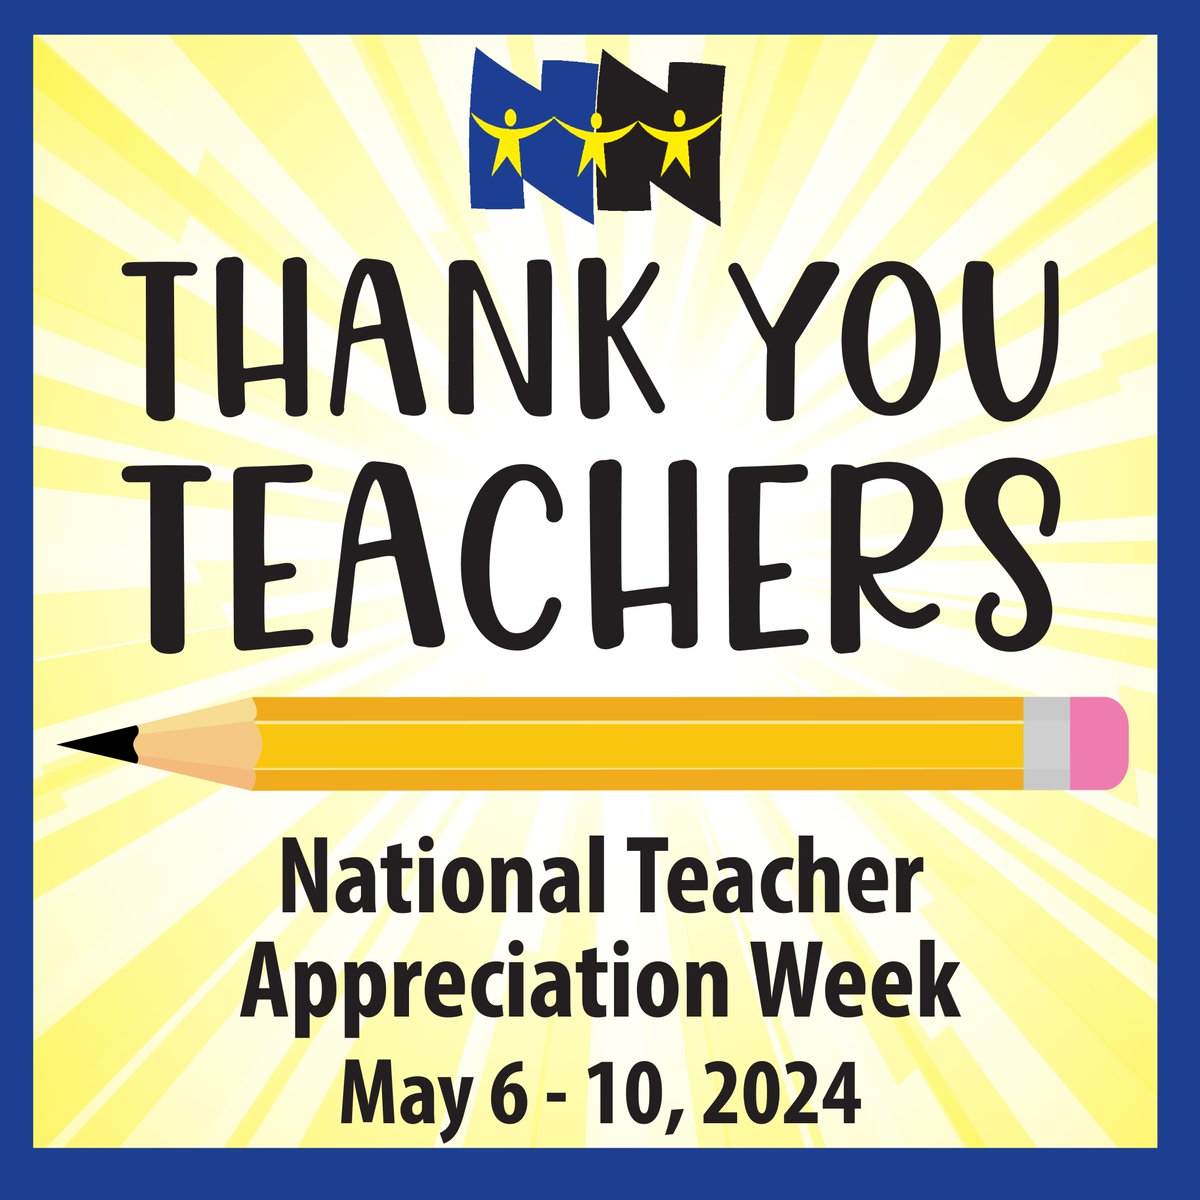 It's National Teacher Appreciation Week! 🧑‍🏫🍎🎉 Please comment below or tag us and give your teacher a shout out as a thank you for all they do. #thankateacher #nnpsproud #teamnnps